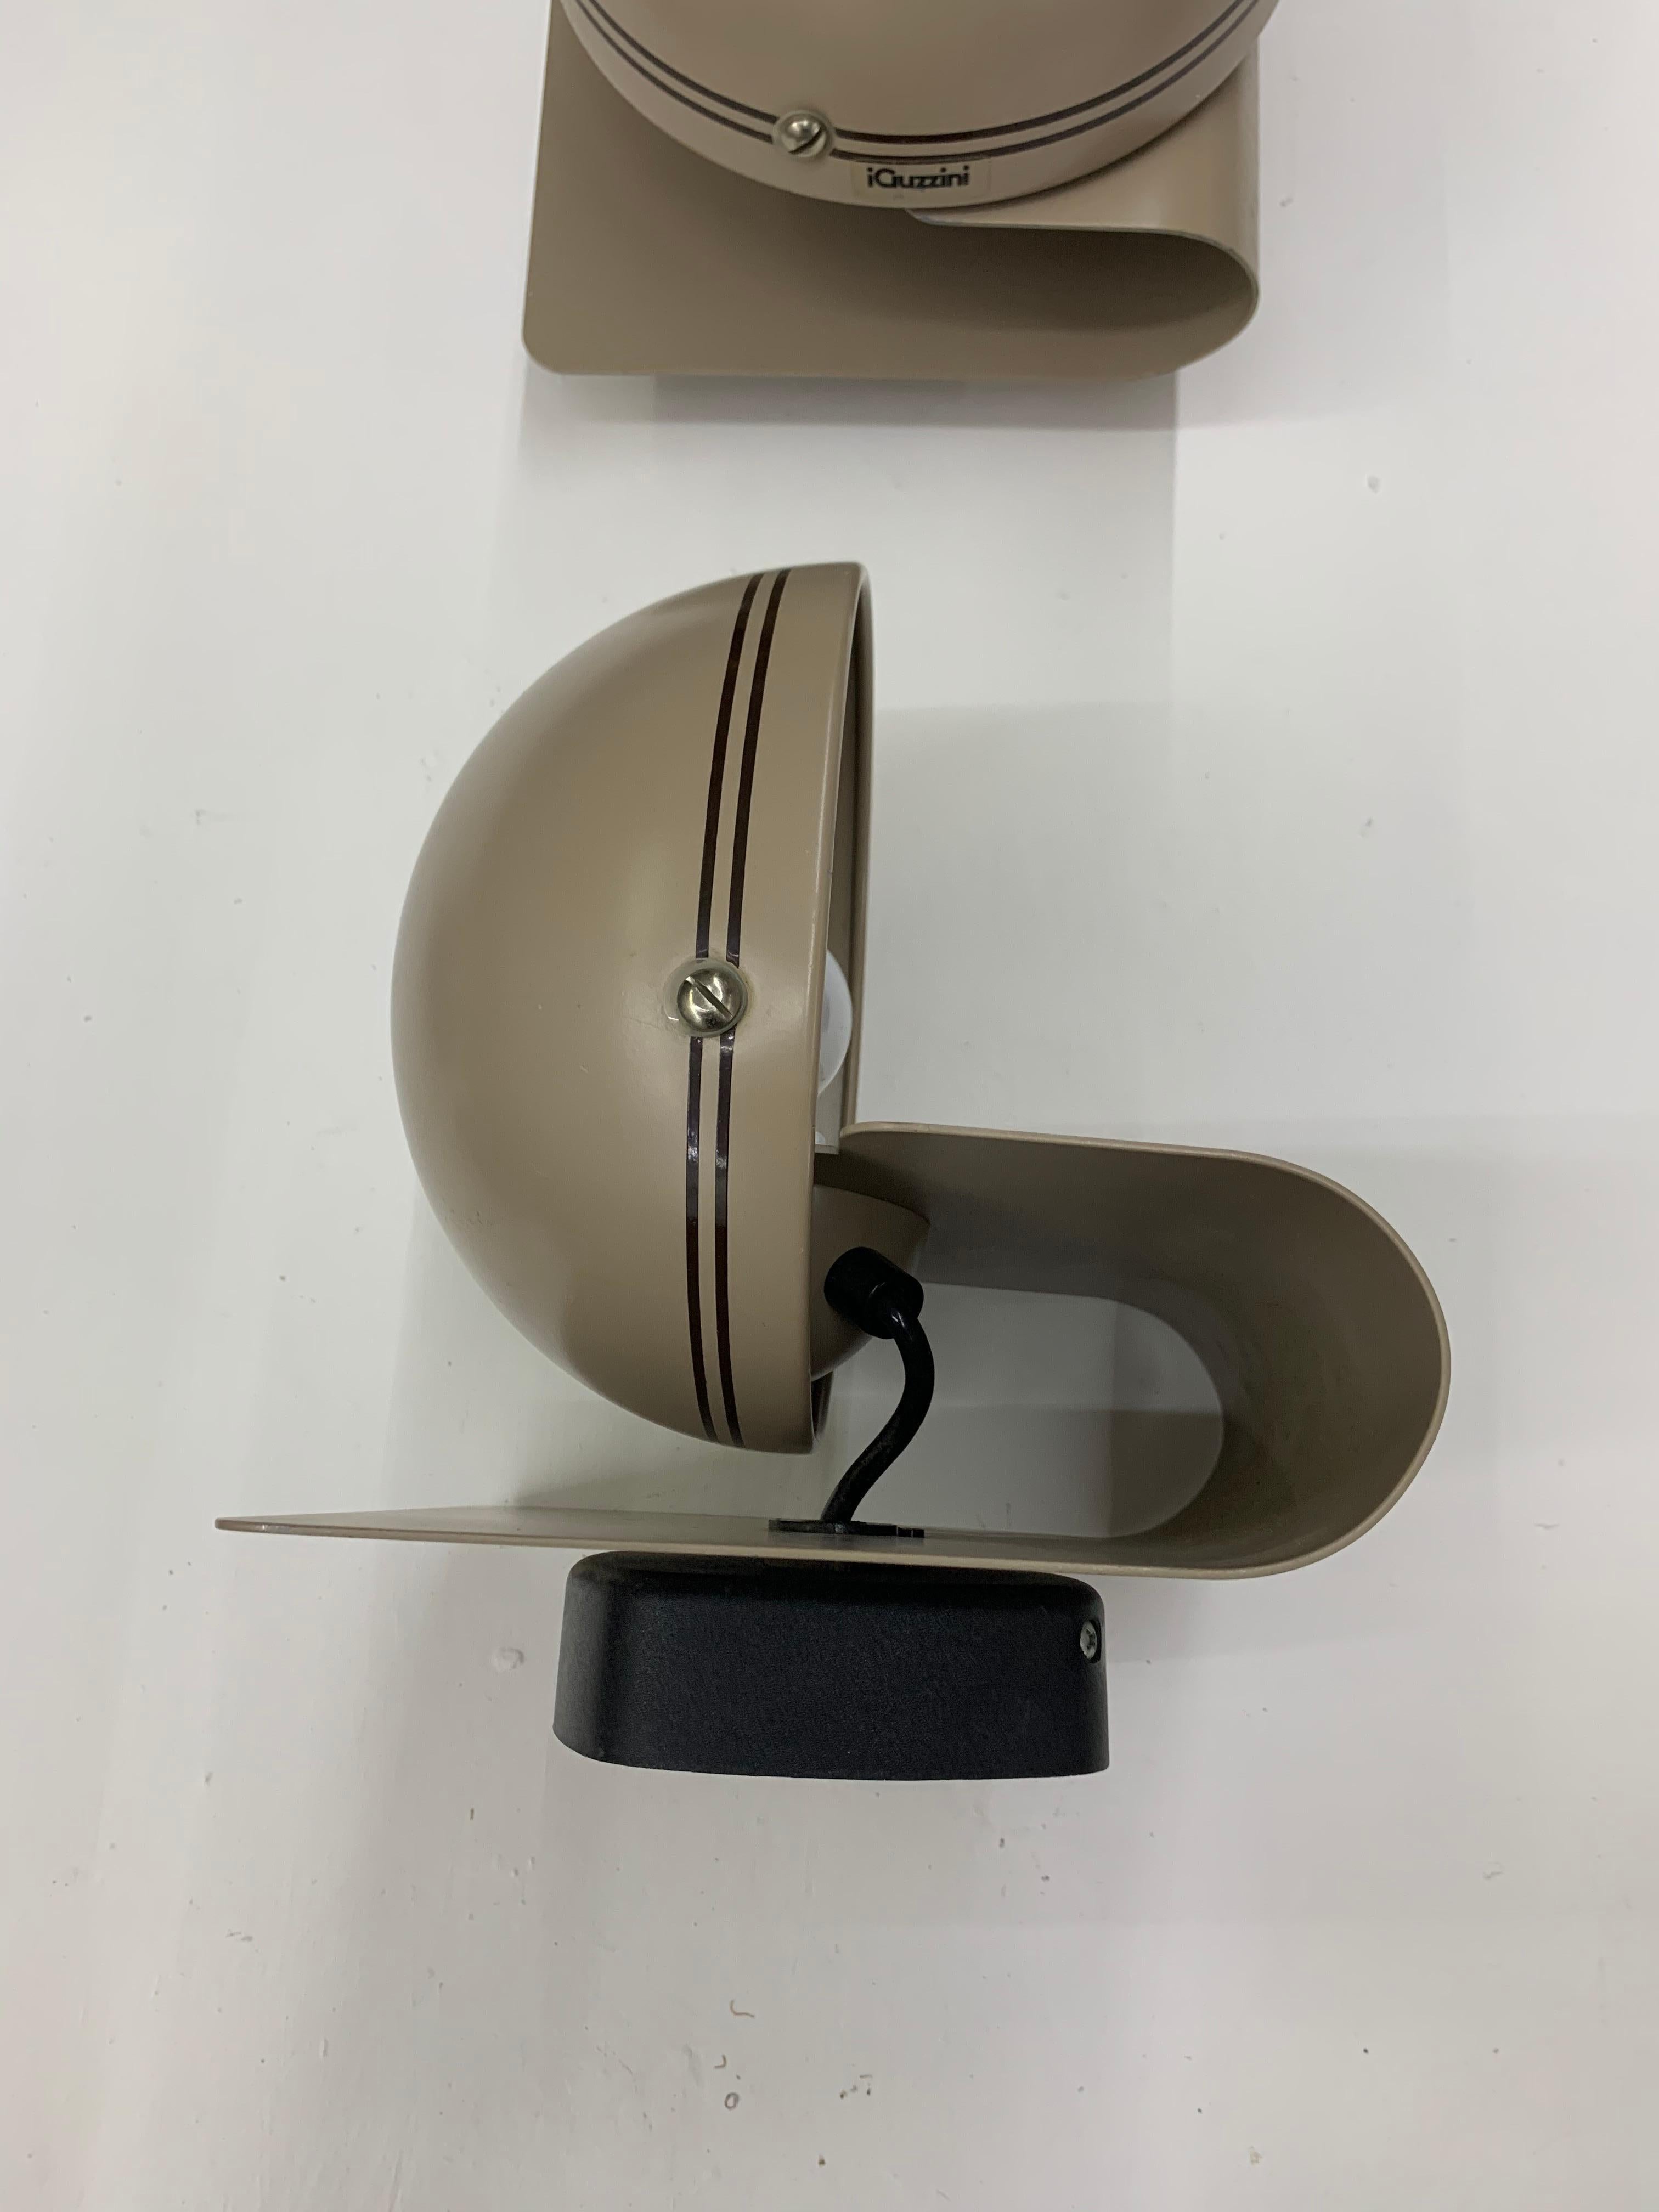 Five wall lights or sconces designed by Harvey Guzzini and manufactured by iGuzzini in Italy, circa 1960
Both the shade and the main body swivel to create different lighting angles and shadows.
Most of them hold their original labels.
Priced